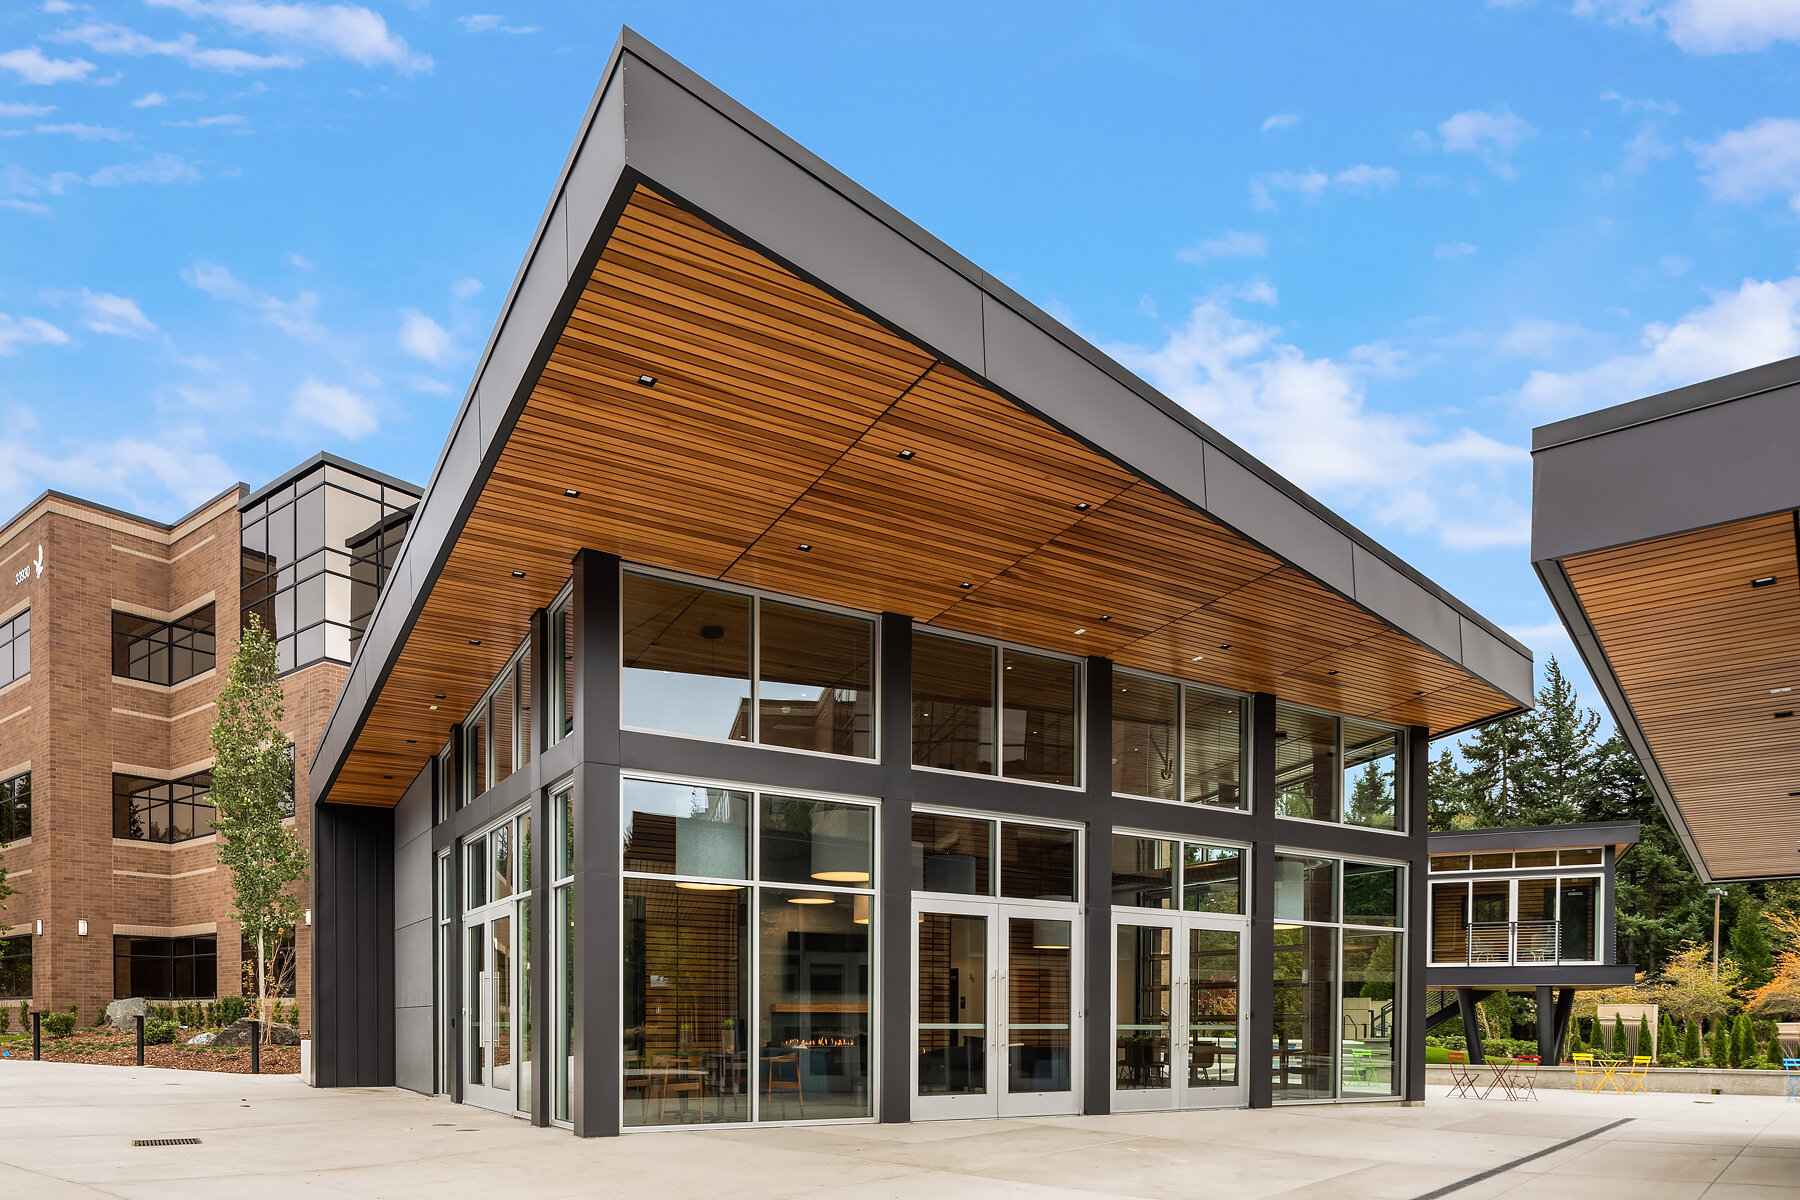 Federal Way's most Prominent Buildings